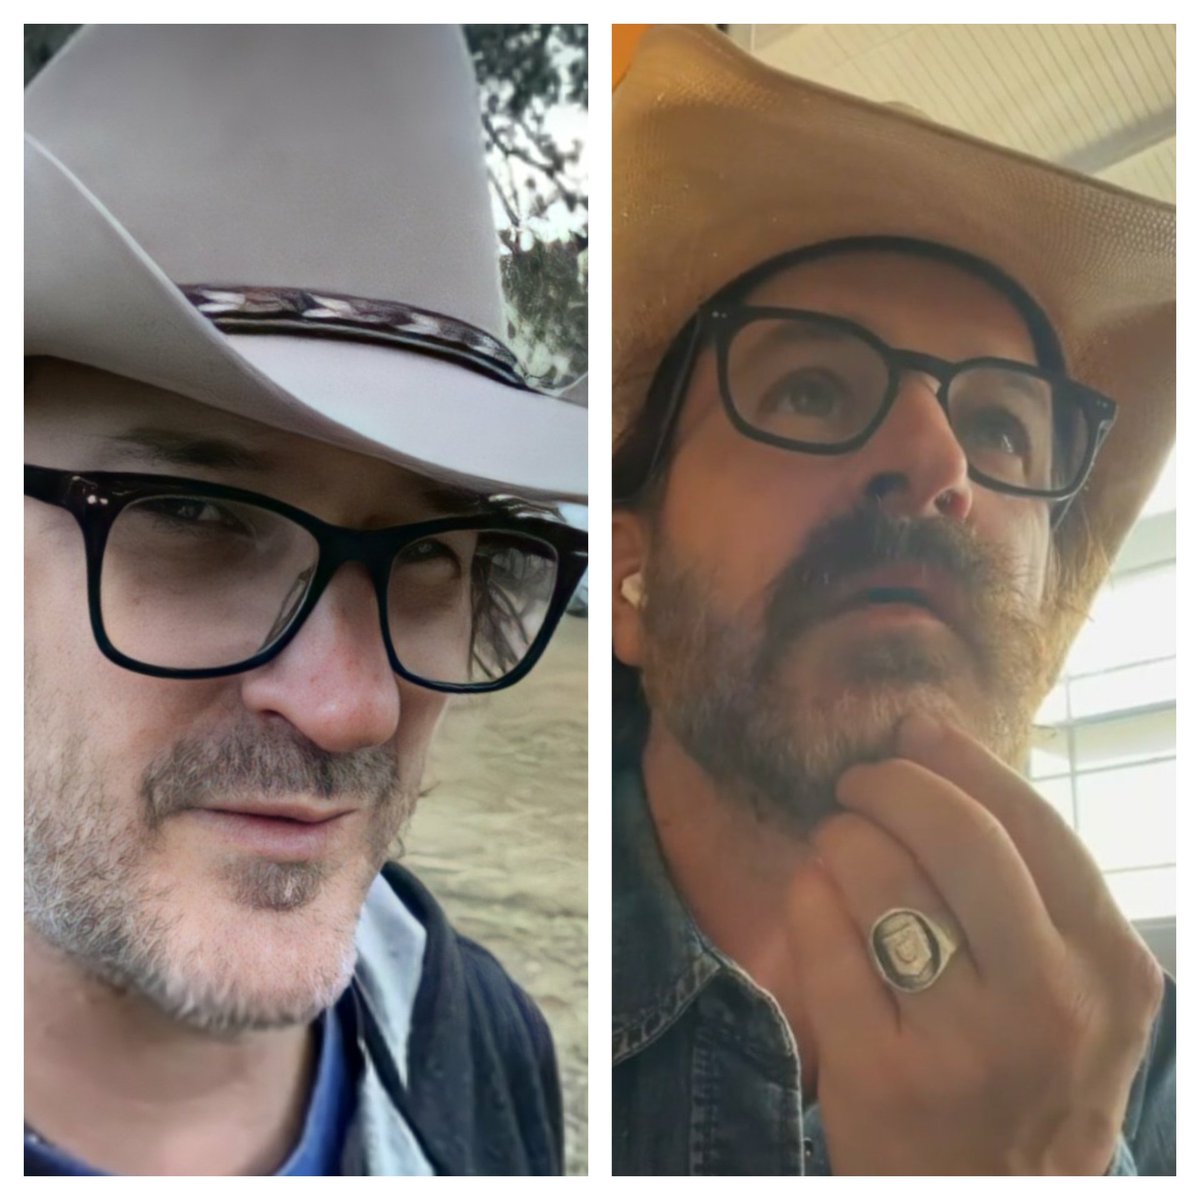 With a 2nd country rock album about to drop, feels only right to share #DickJrAndTheVolunteers' frontman rocking a Western hat or two for #NationalHatDay. On the left is Rich's custom lockdown pick-me-up from Oregon's Pendleton Hat Co. On the right, an Austin thriftstore find.